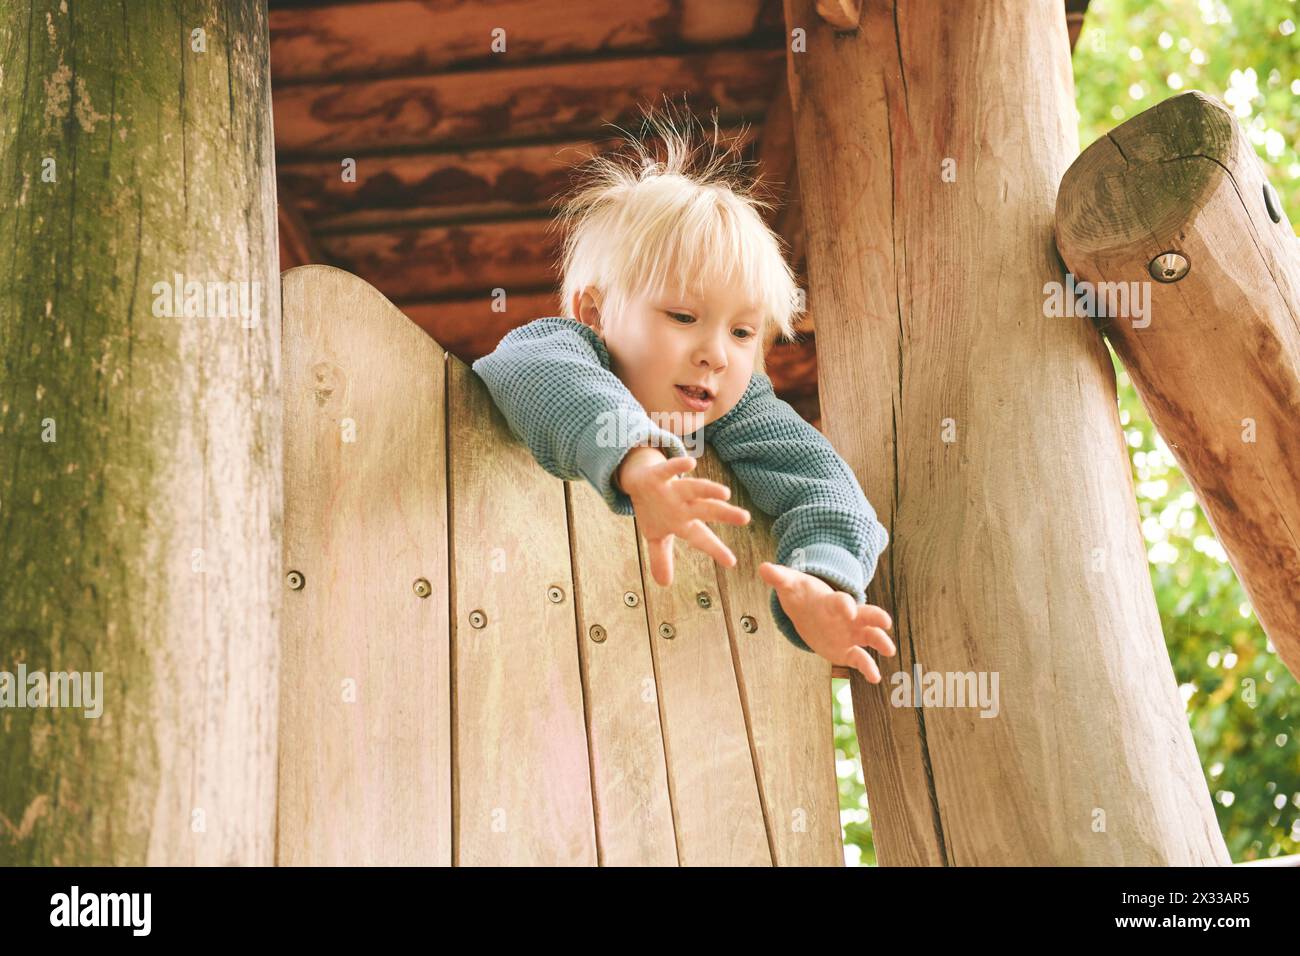 Outdoor portrait of adorable 4 - 5 year old little boy playing on playground Stock Photo